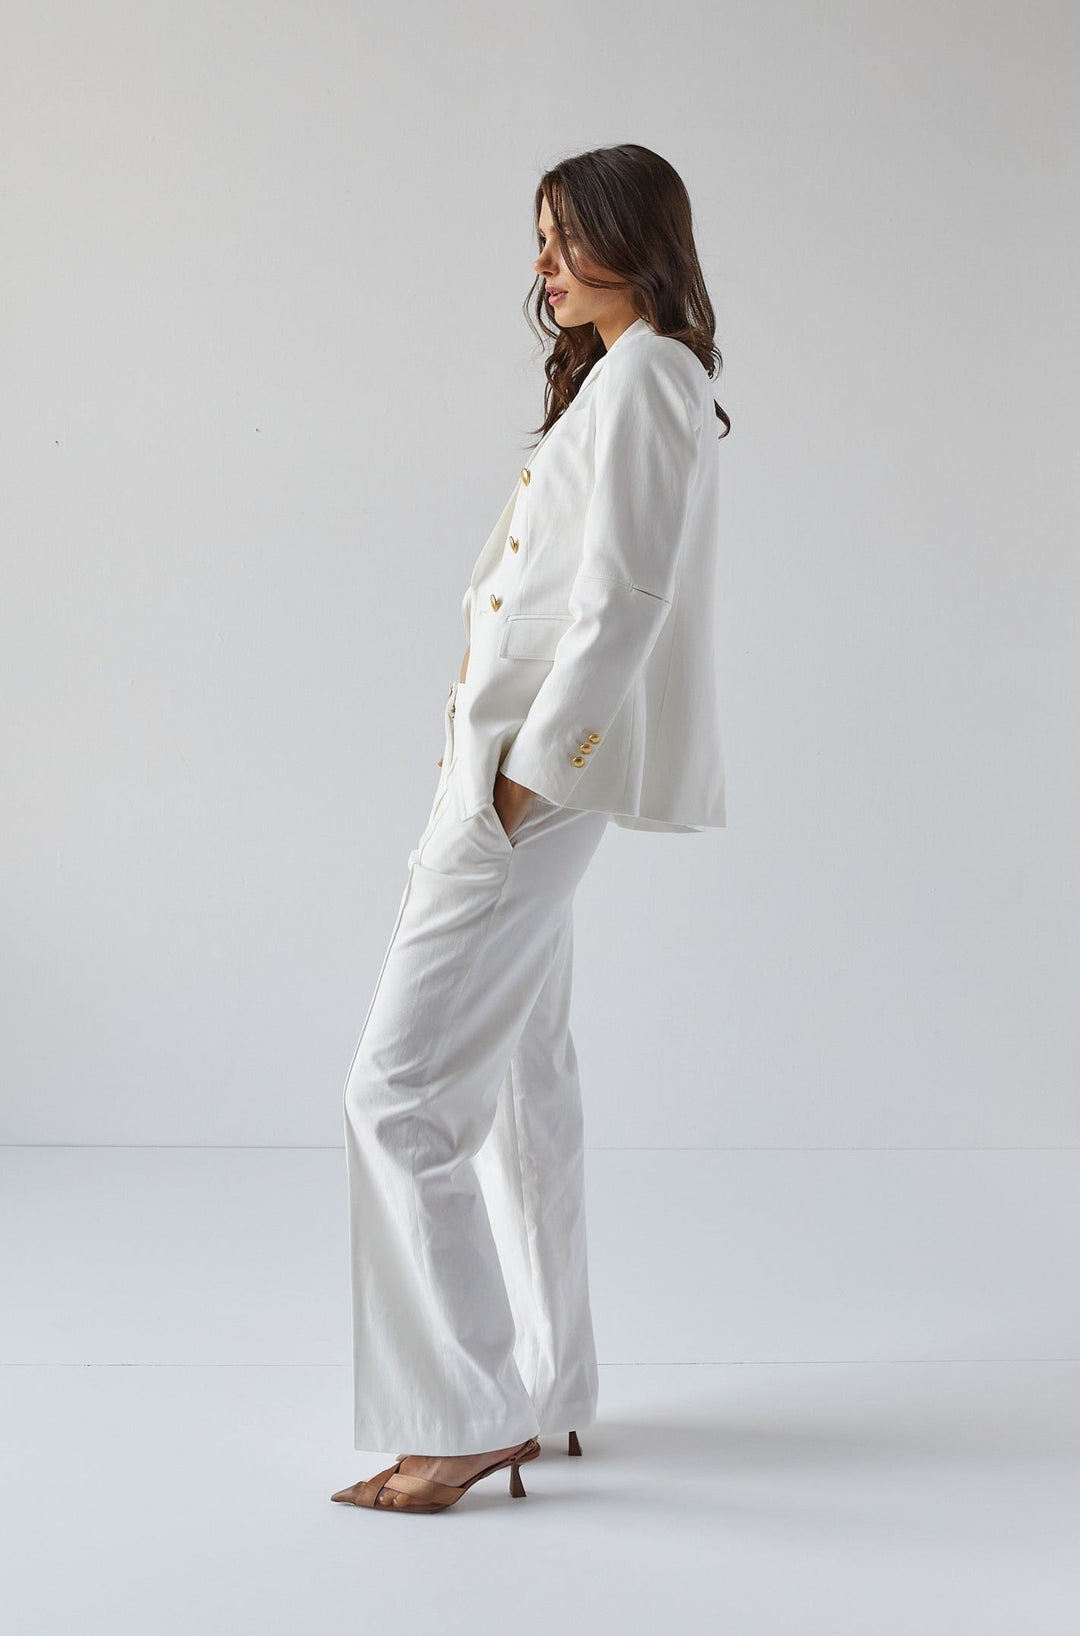 Adroit Atelier James Double Breasted Signature Stretch Blazer in White